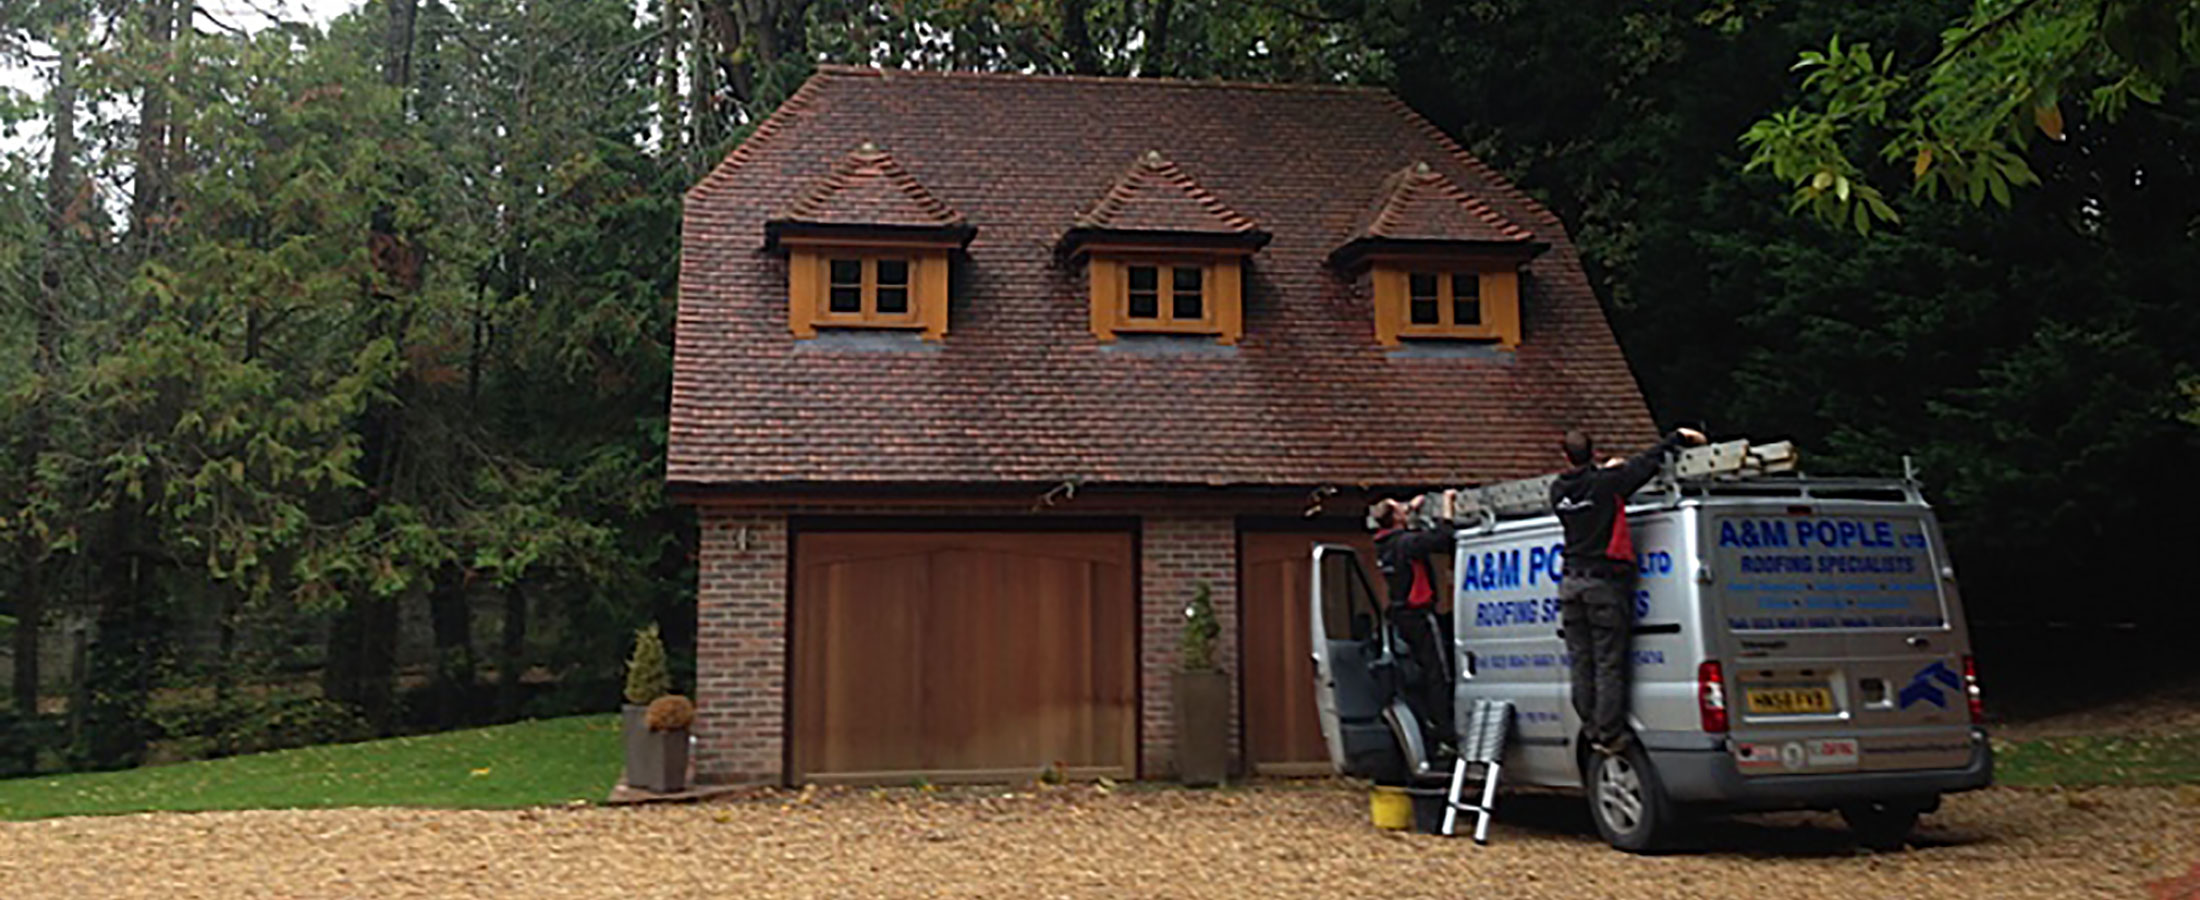 Pople Roofing Services, new roofs, roof repairs, flat roof repairs, chimney repairs, guttering repairs, lead work repairs, cladding repairs, Winchester, Hampshire